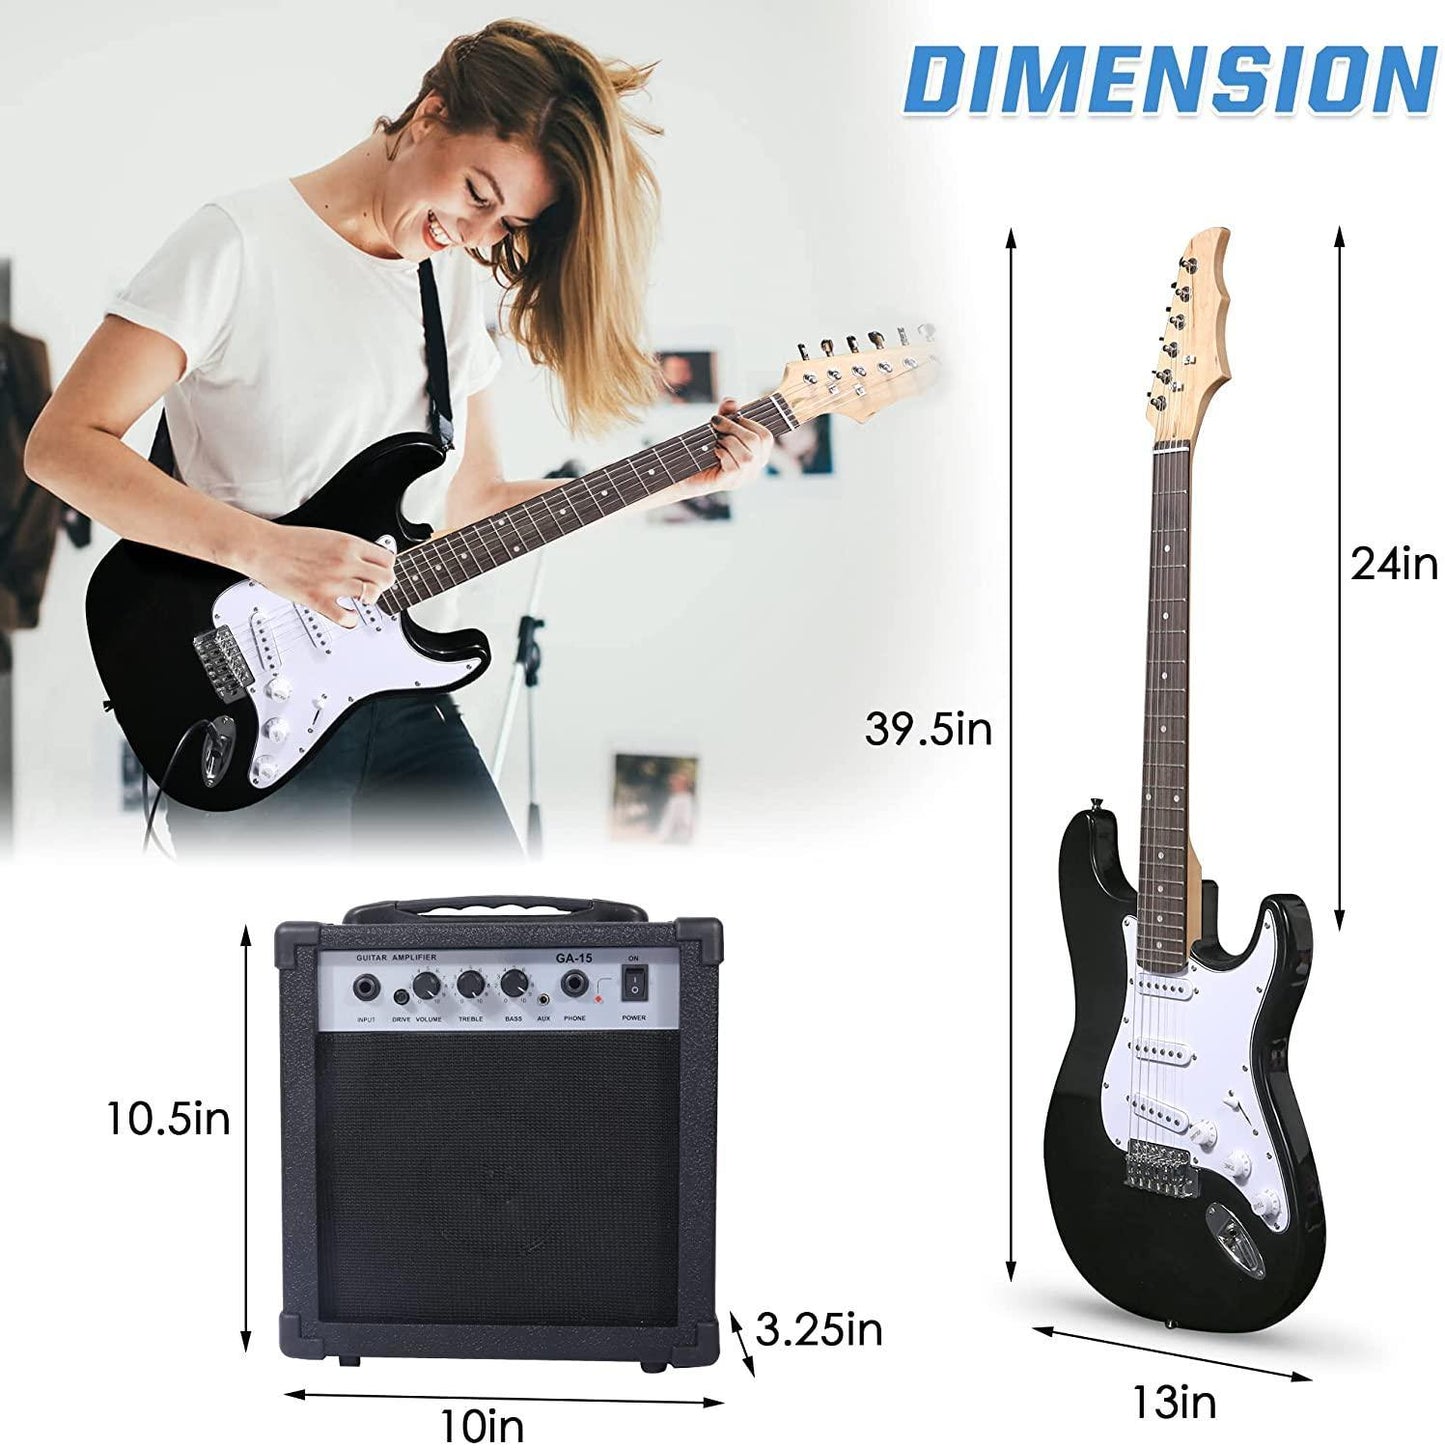 39 Inch Electric Guitar Starter Kit for Teenager and Adult;  Full-size Beginner Guitar with 10 W Amplifier;  Carrier Bag;  Tuner;  Strings;  Picks;  Cable